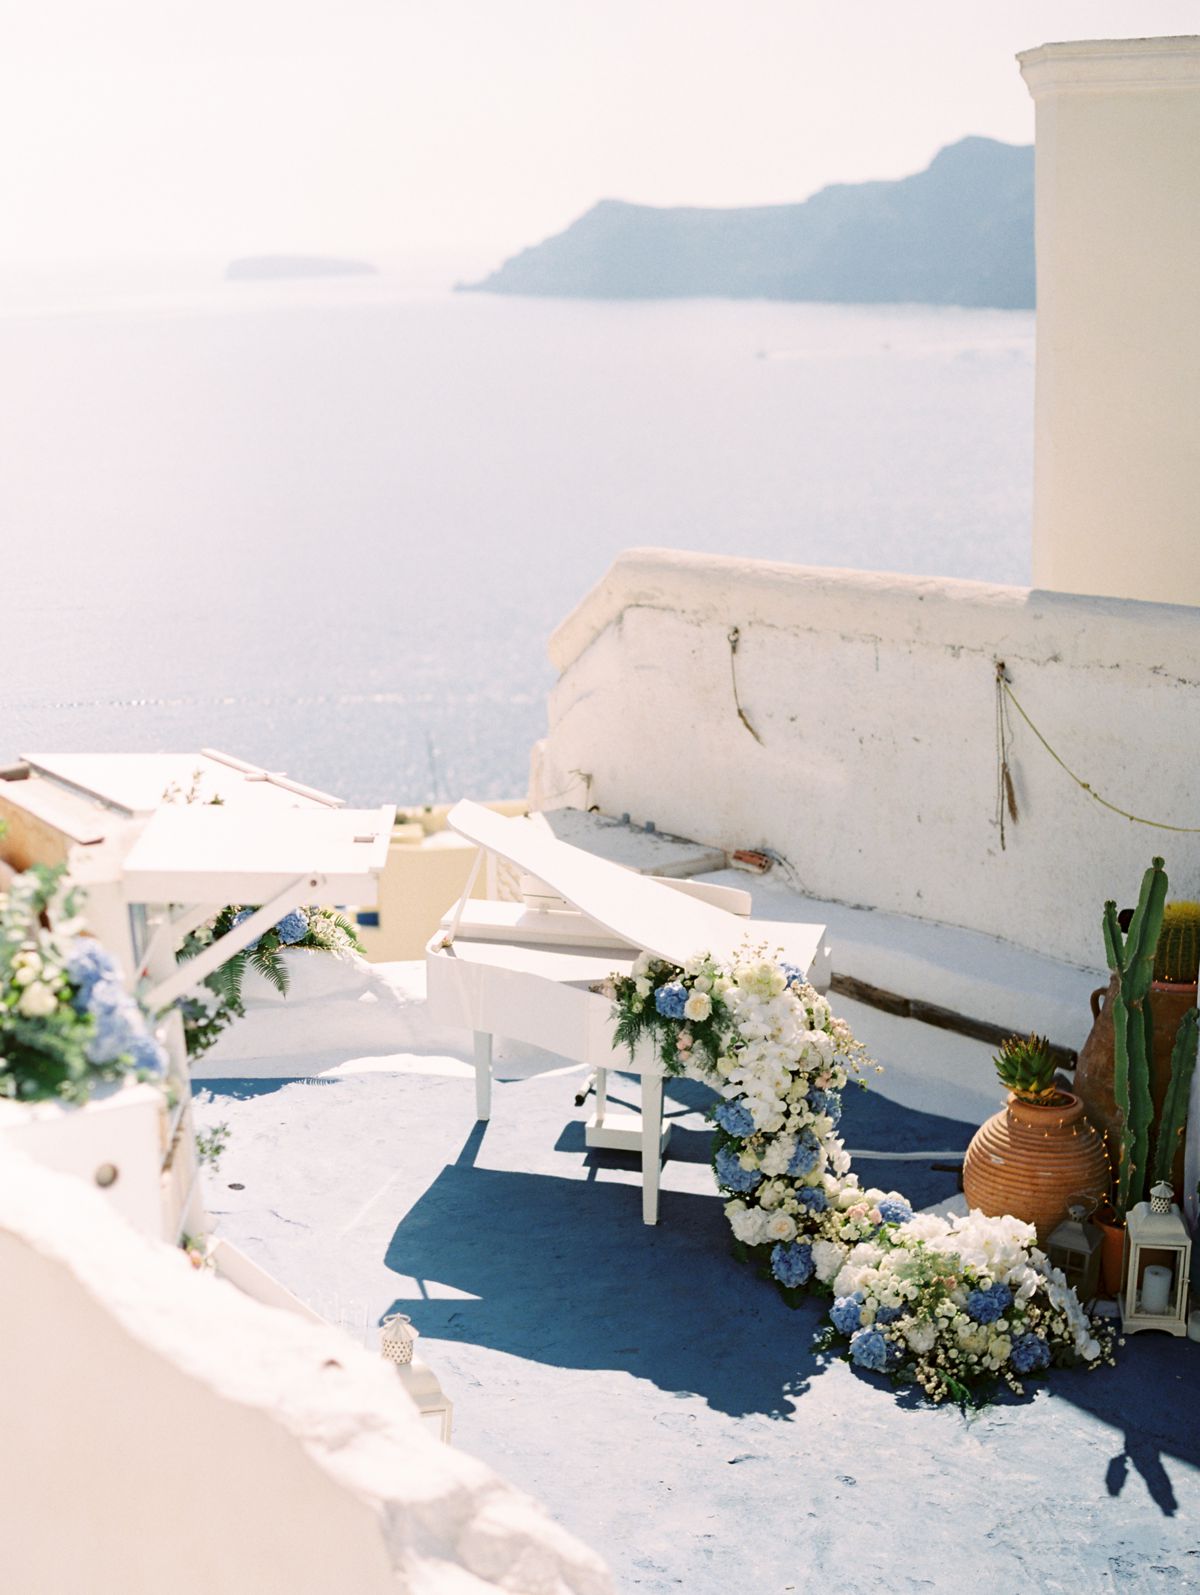 A proposal with a piano at Santorini island